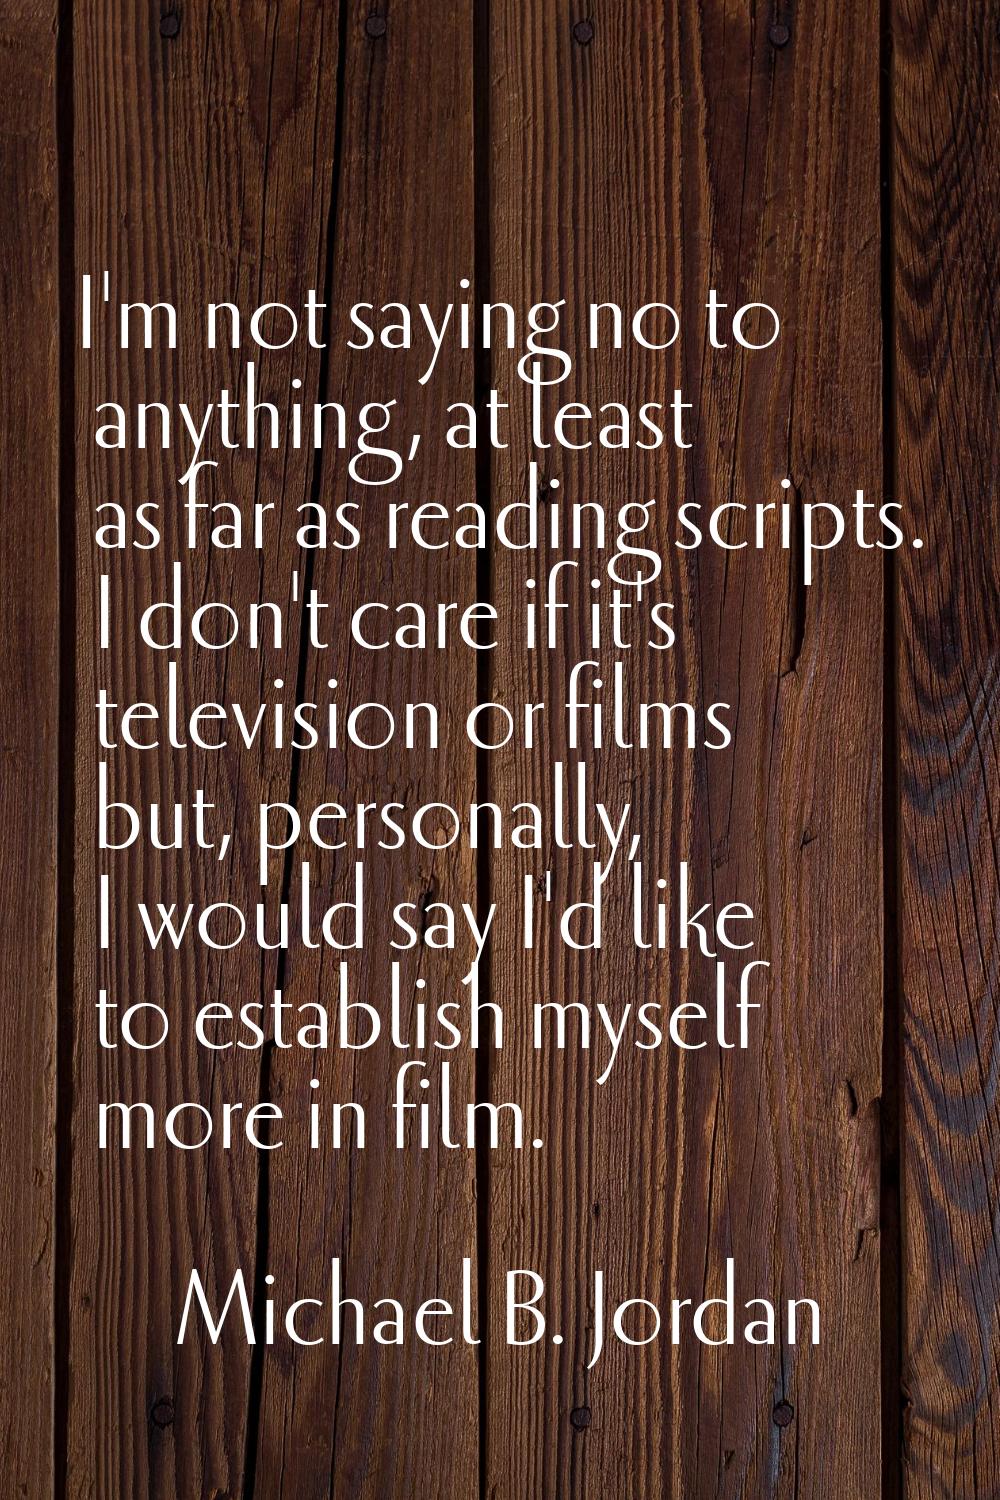 I'm not saying no to anything, at least as far as reading scripts. I don't care if it's television 